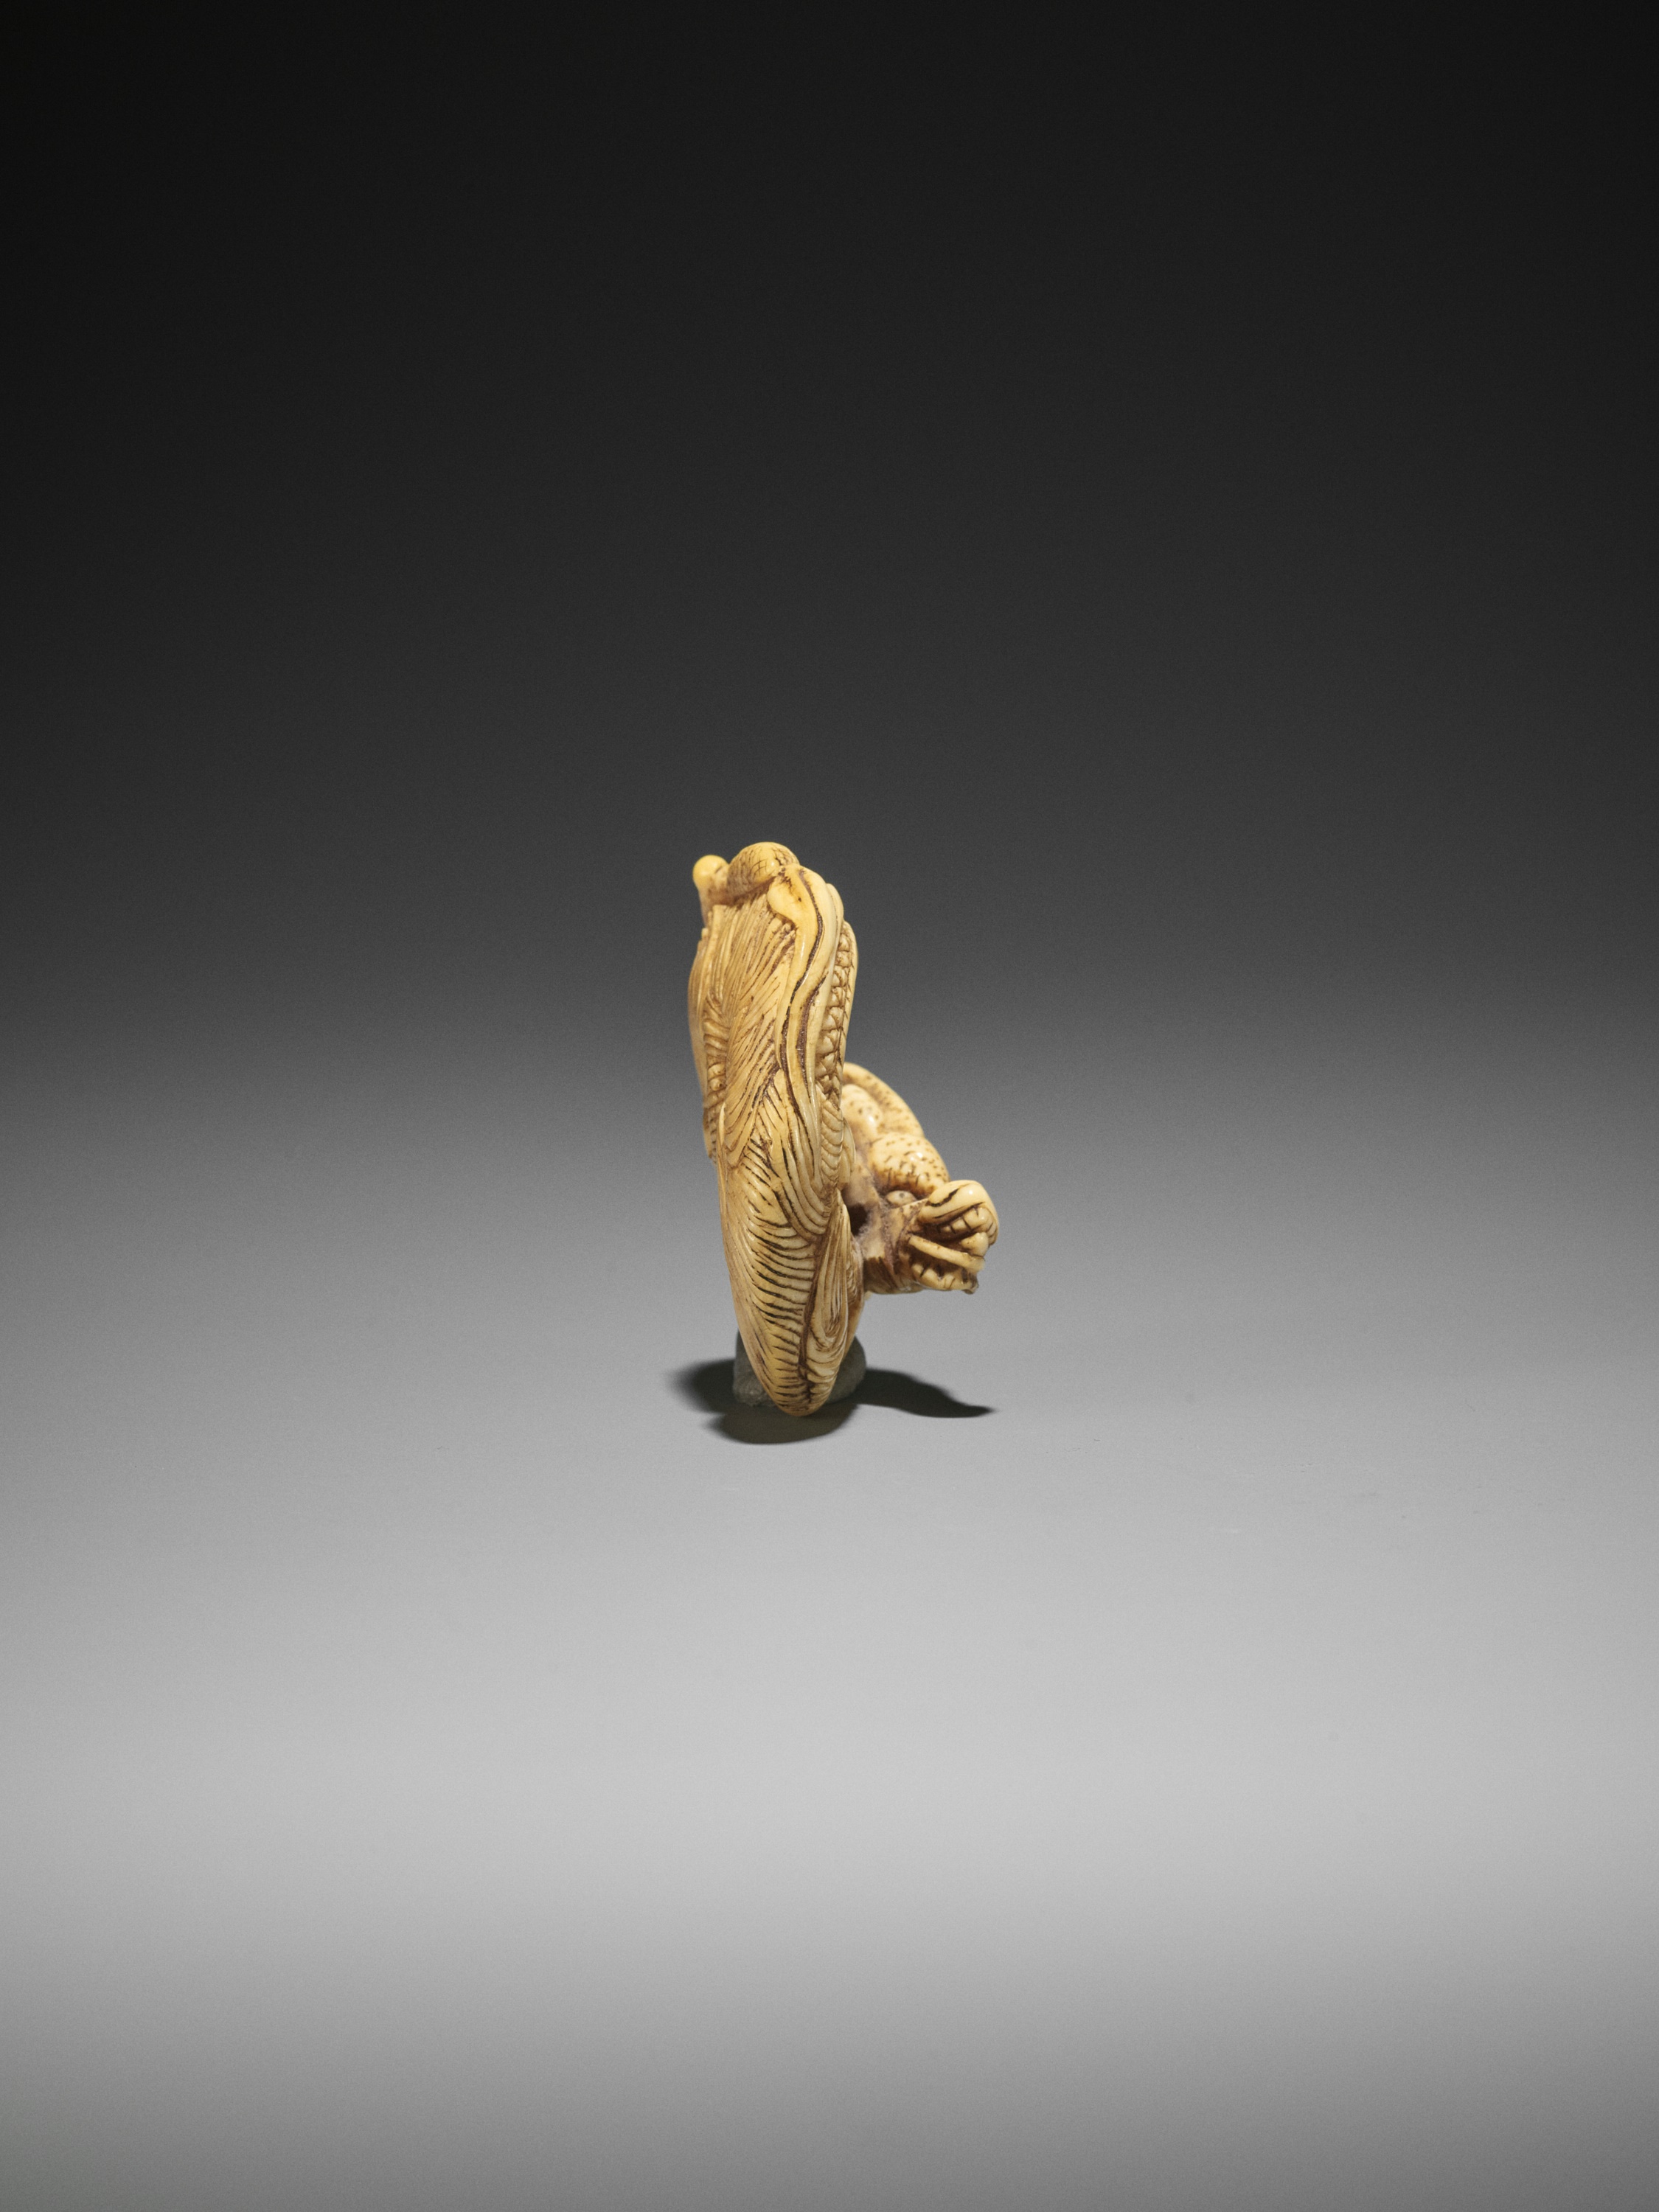 AN IVORY NETSUKE OF A COILED ONE-HORNED DRAGON - Image 8 of 10